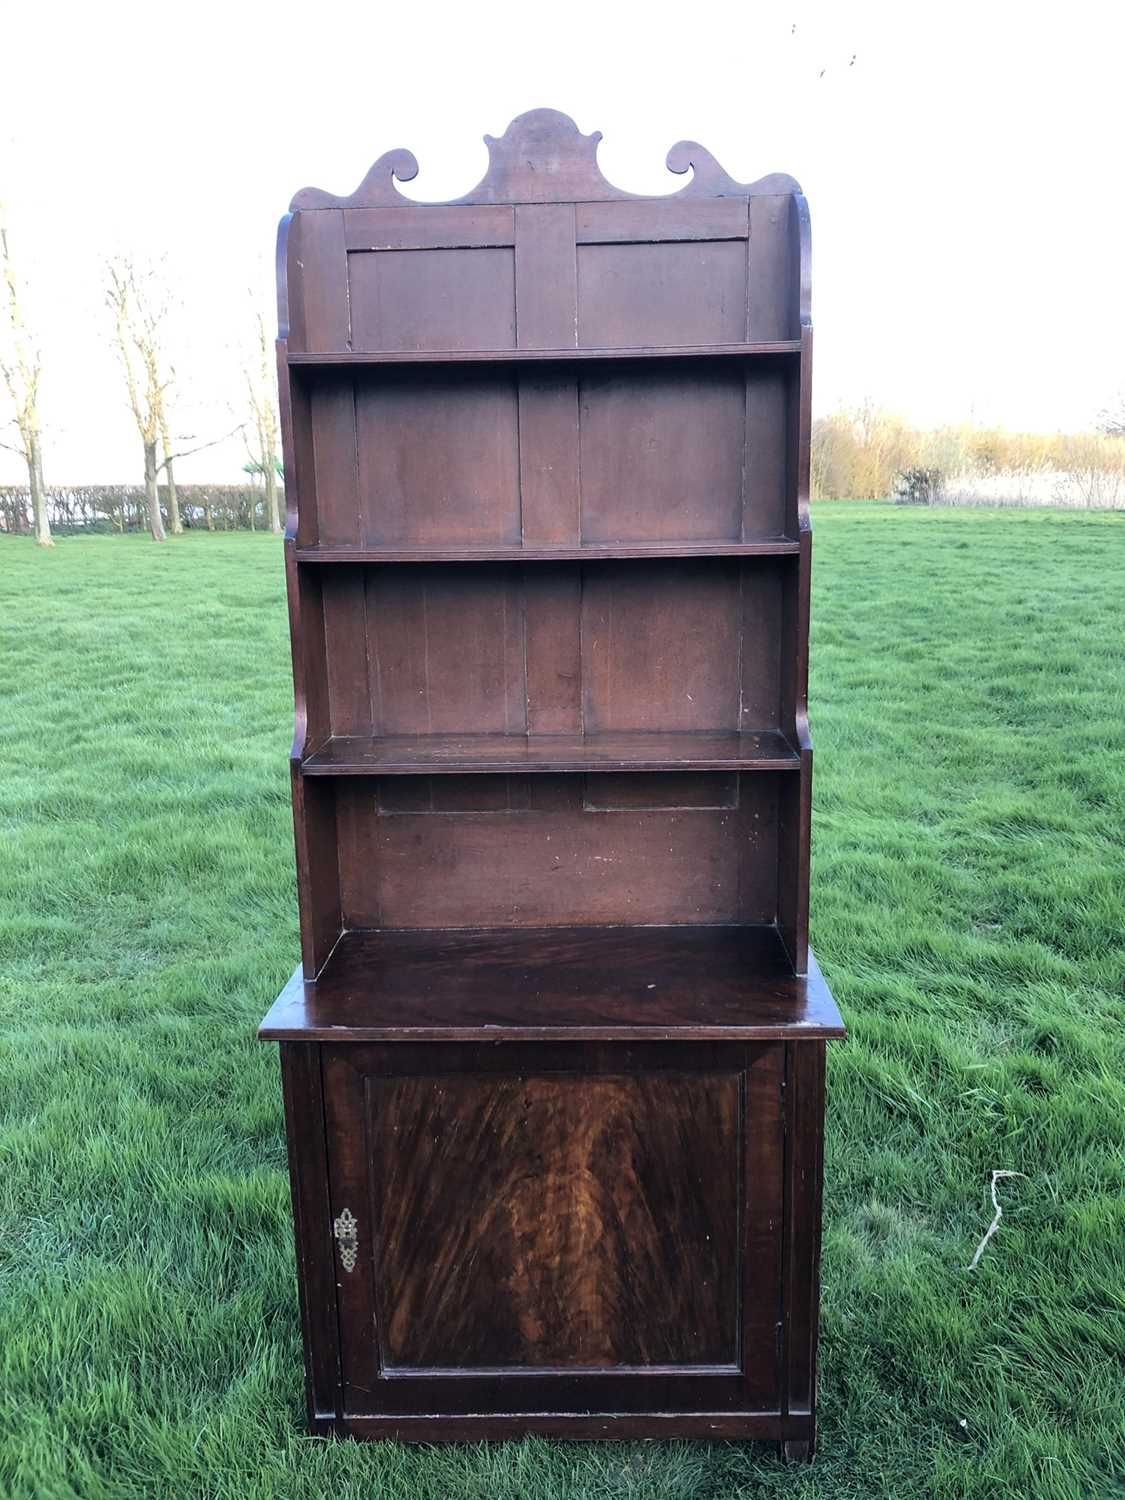 Lot 31 - 19th century mahogany and grained waterfall bookcase with scrolling top rail and graduated open shelves, enclosed panel cupboard below, on tapering legs, 78cm wide x 38cm deep x 190cm high